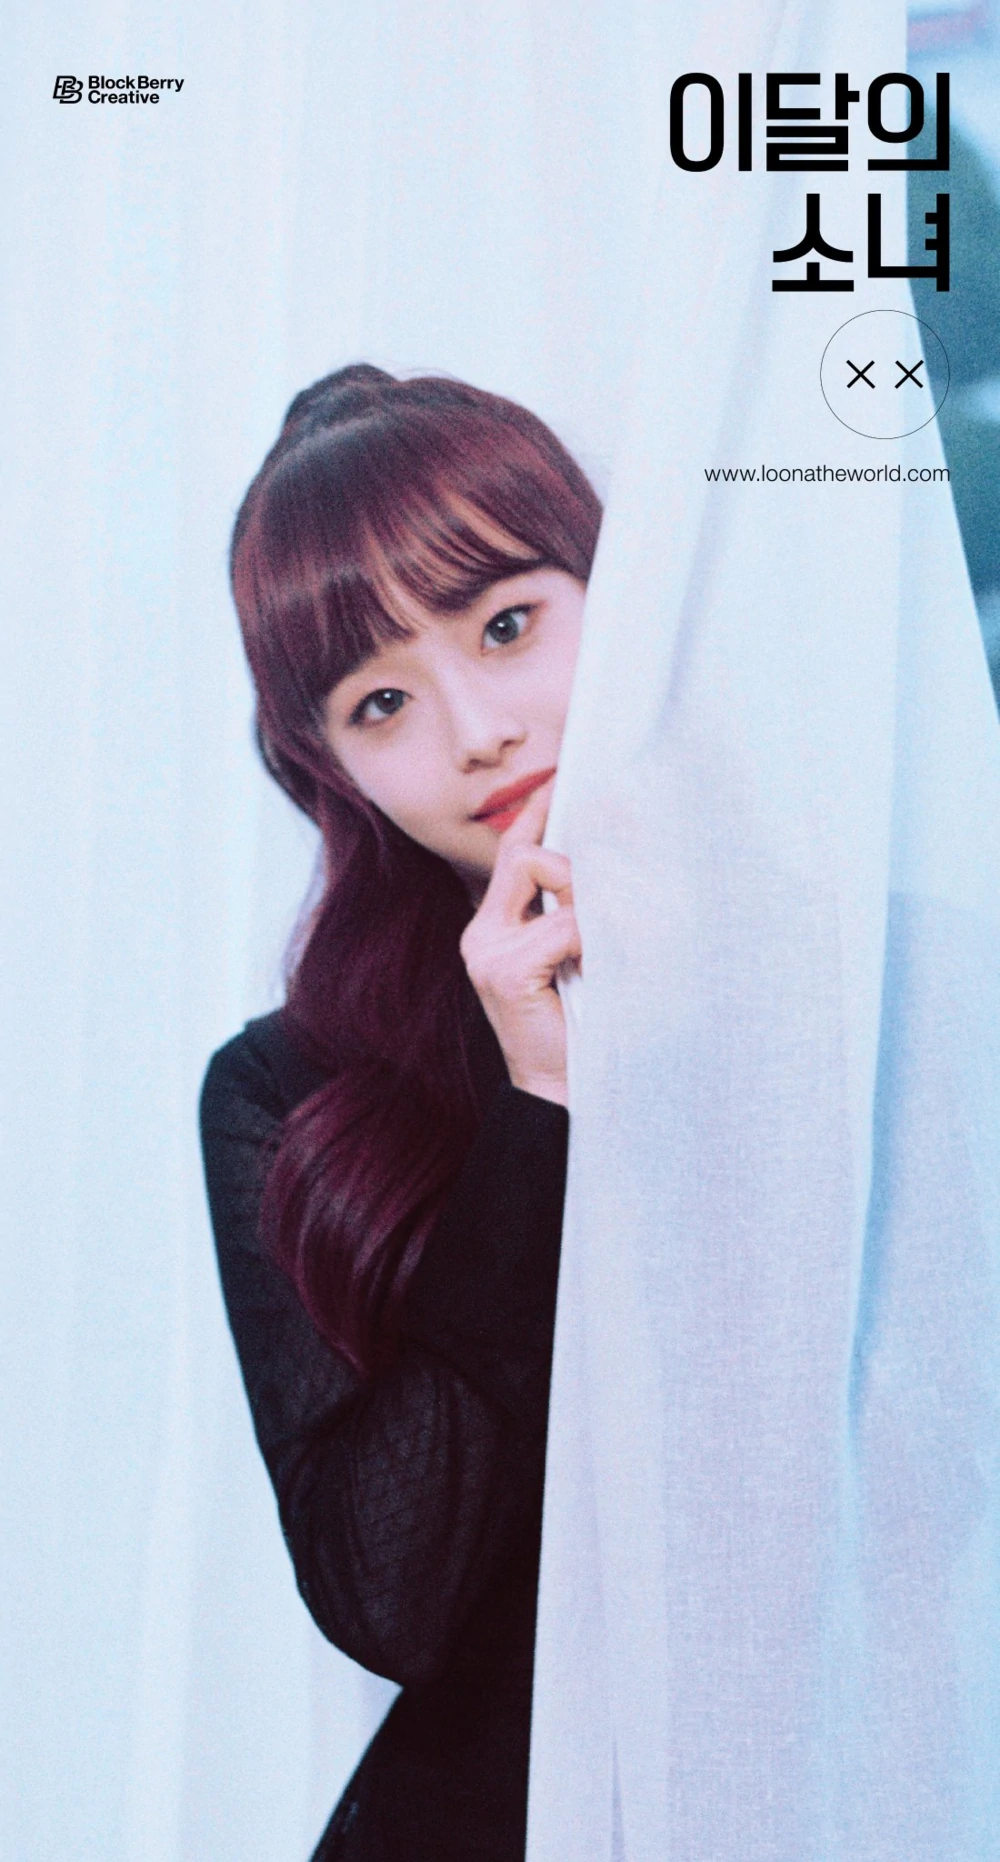 Loona XX Chuu Concept Teaser Picture Image Photo Kpop K-Concept